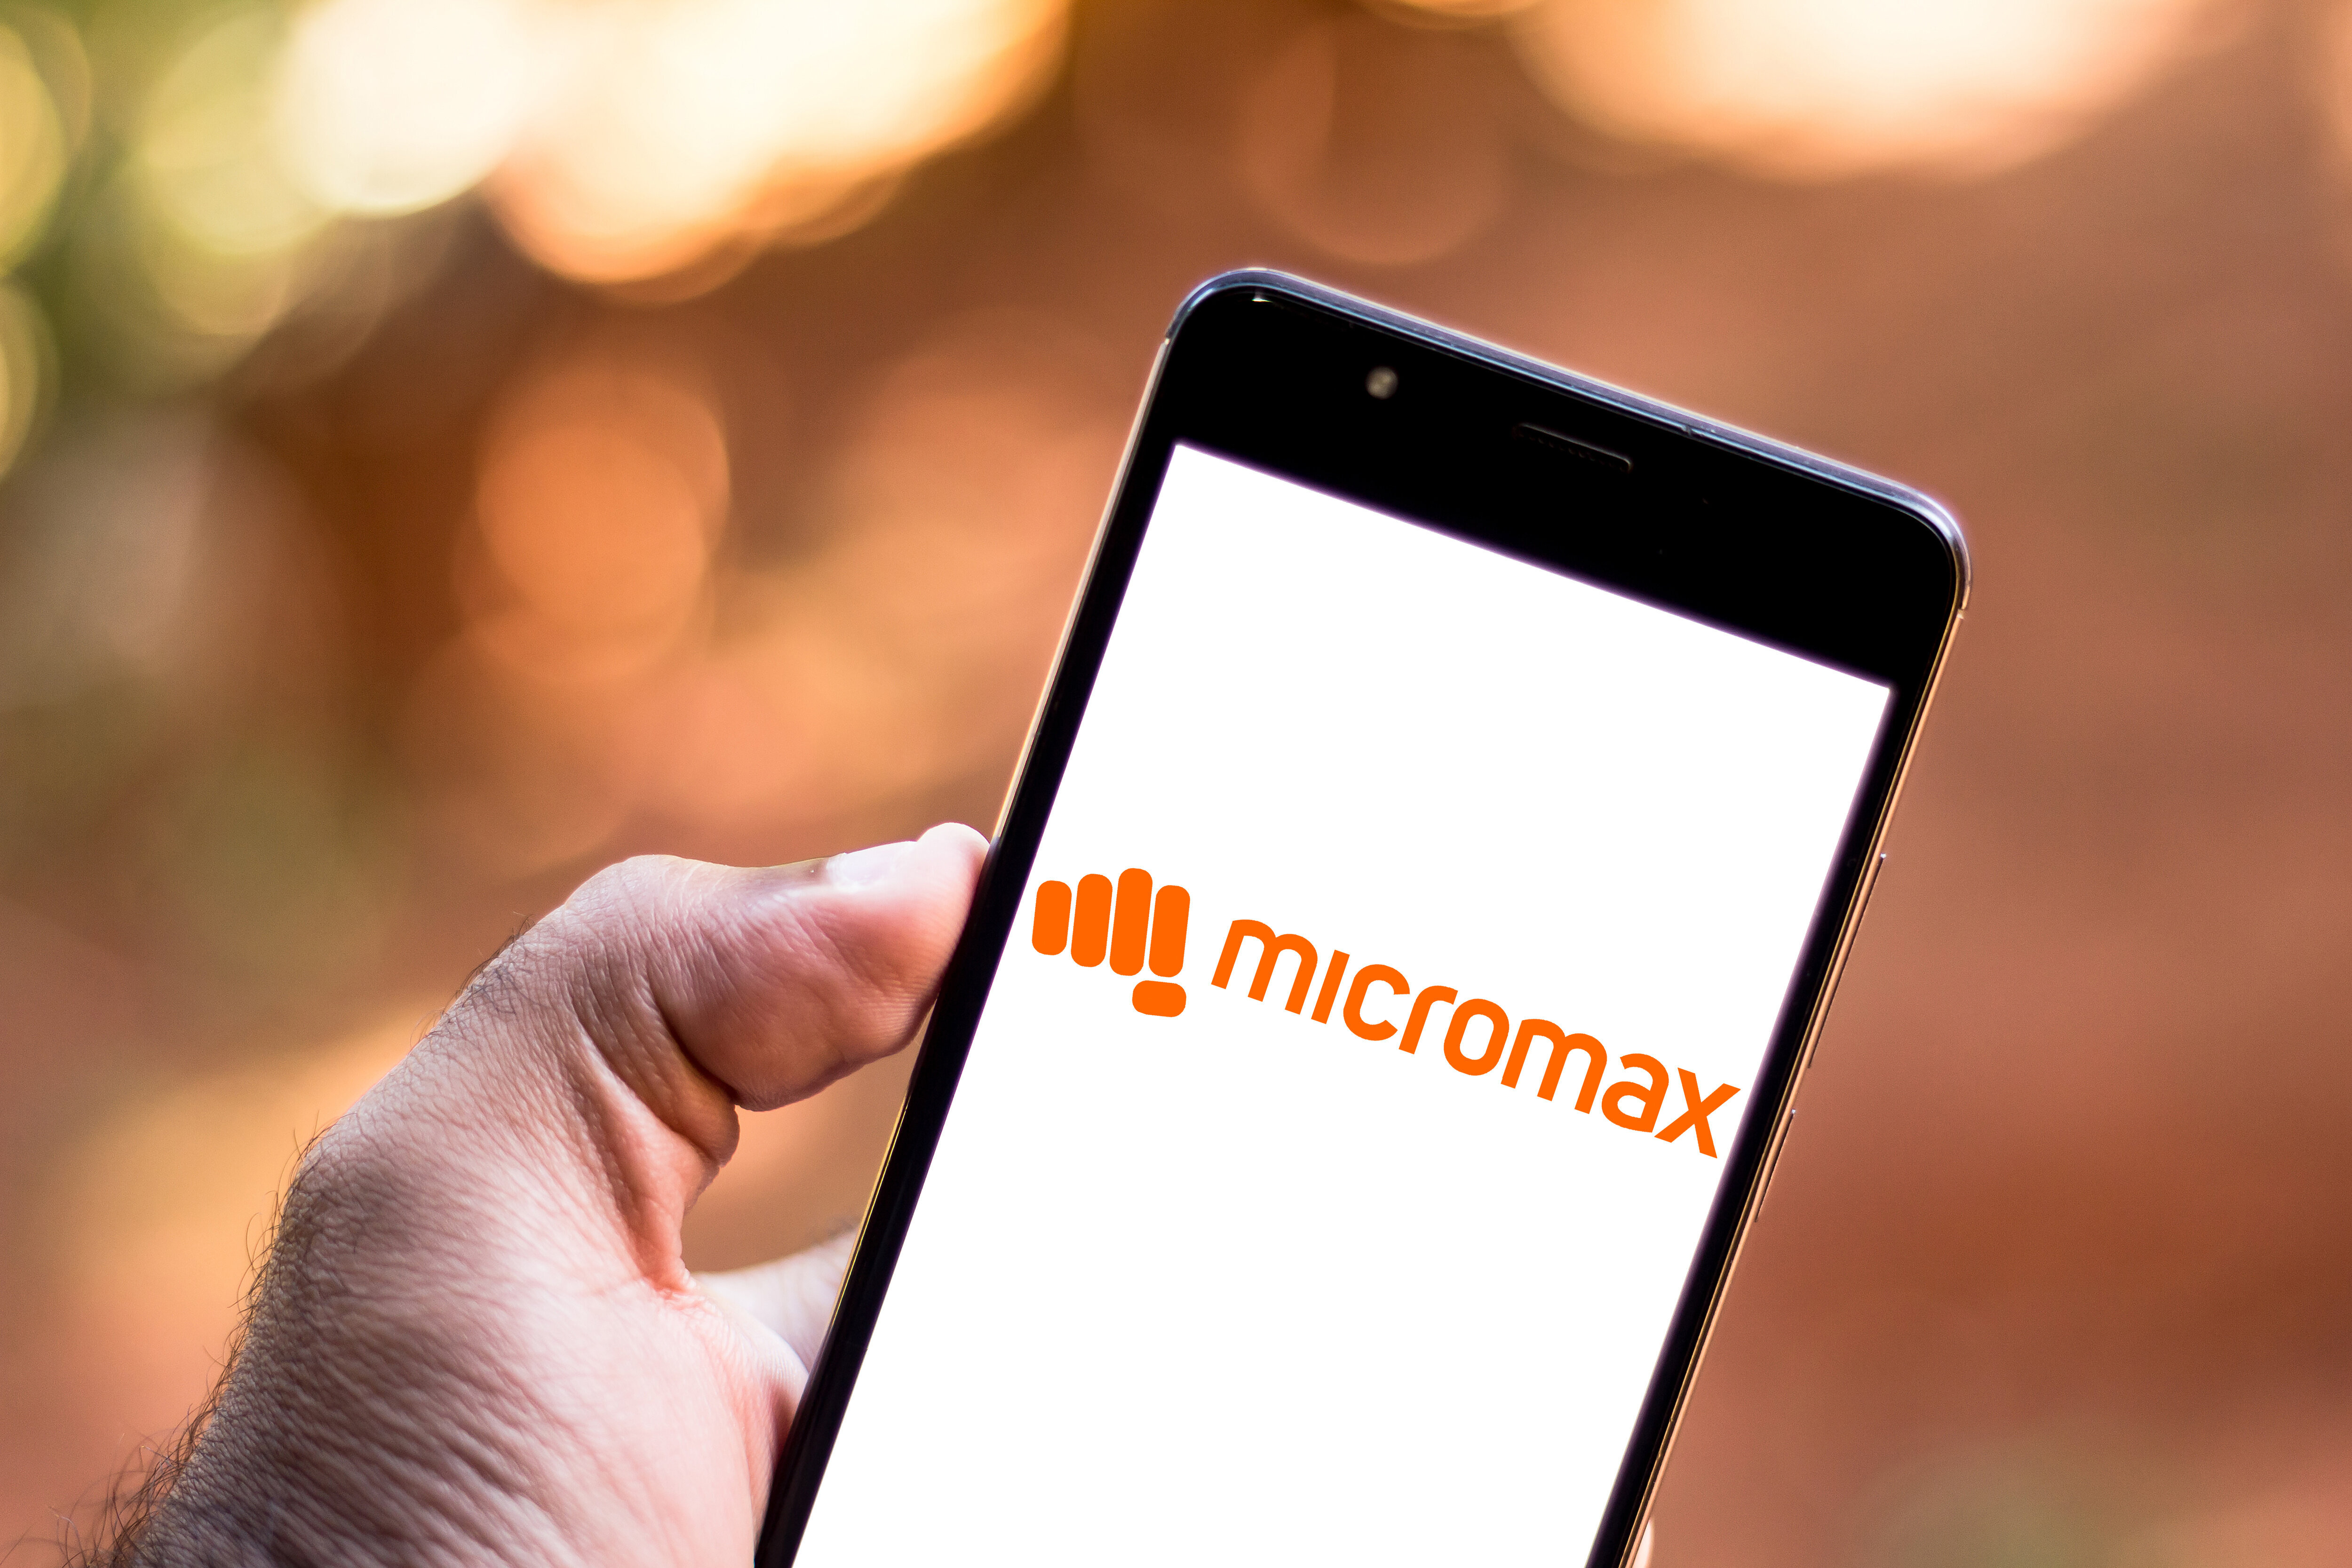 Micromax: The Bold New-International Appeal?